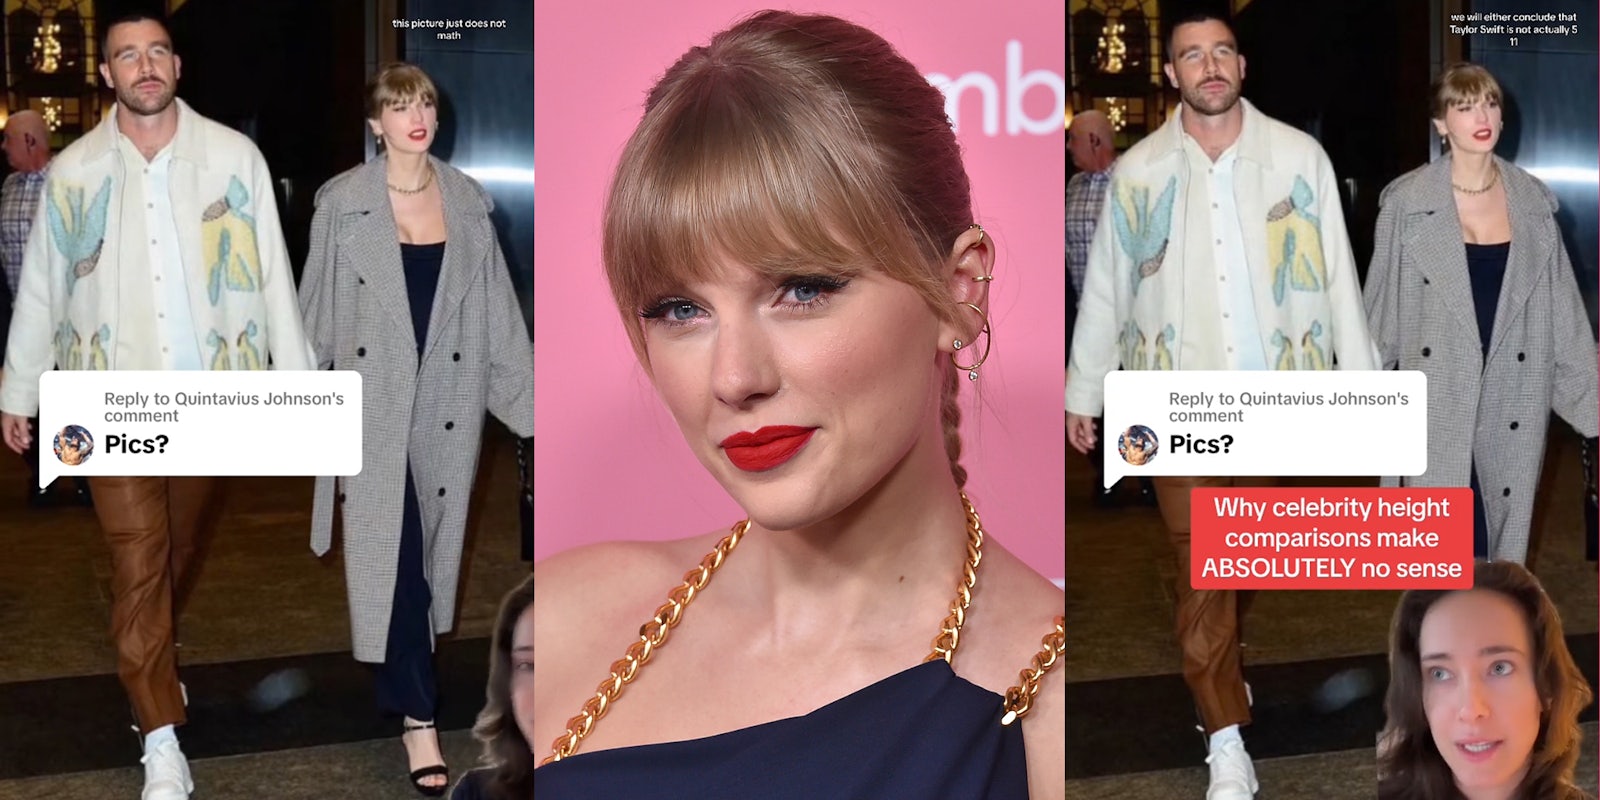 woman greenscreen TikTok over Travis Kelce and Taylor Swift with caption 'Pics? this picture does not math' (l) Taylor Swift in front of pink background (c) woman greenscreen TikTok over Travis Kelce and Taylor Swift with caption 'Pics? we will either conclude that Taylor Swift is not actually 5 11 Why celebrity height comparisons make ABSOLUTELY no sense' (r)